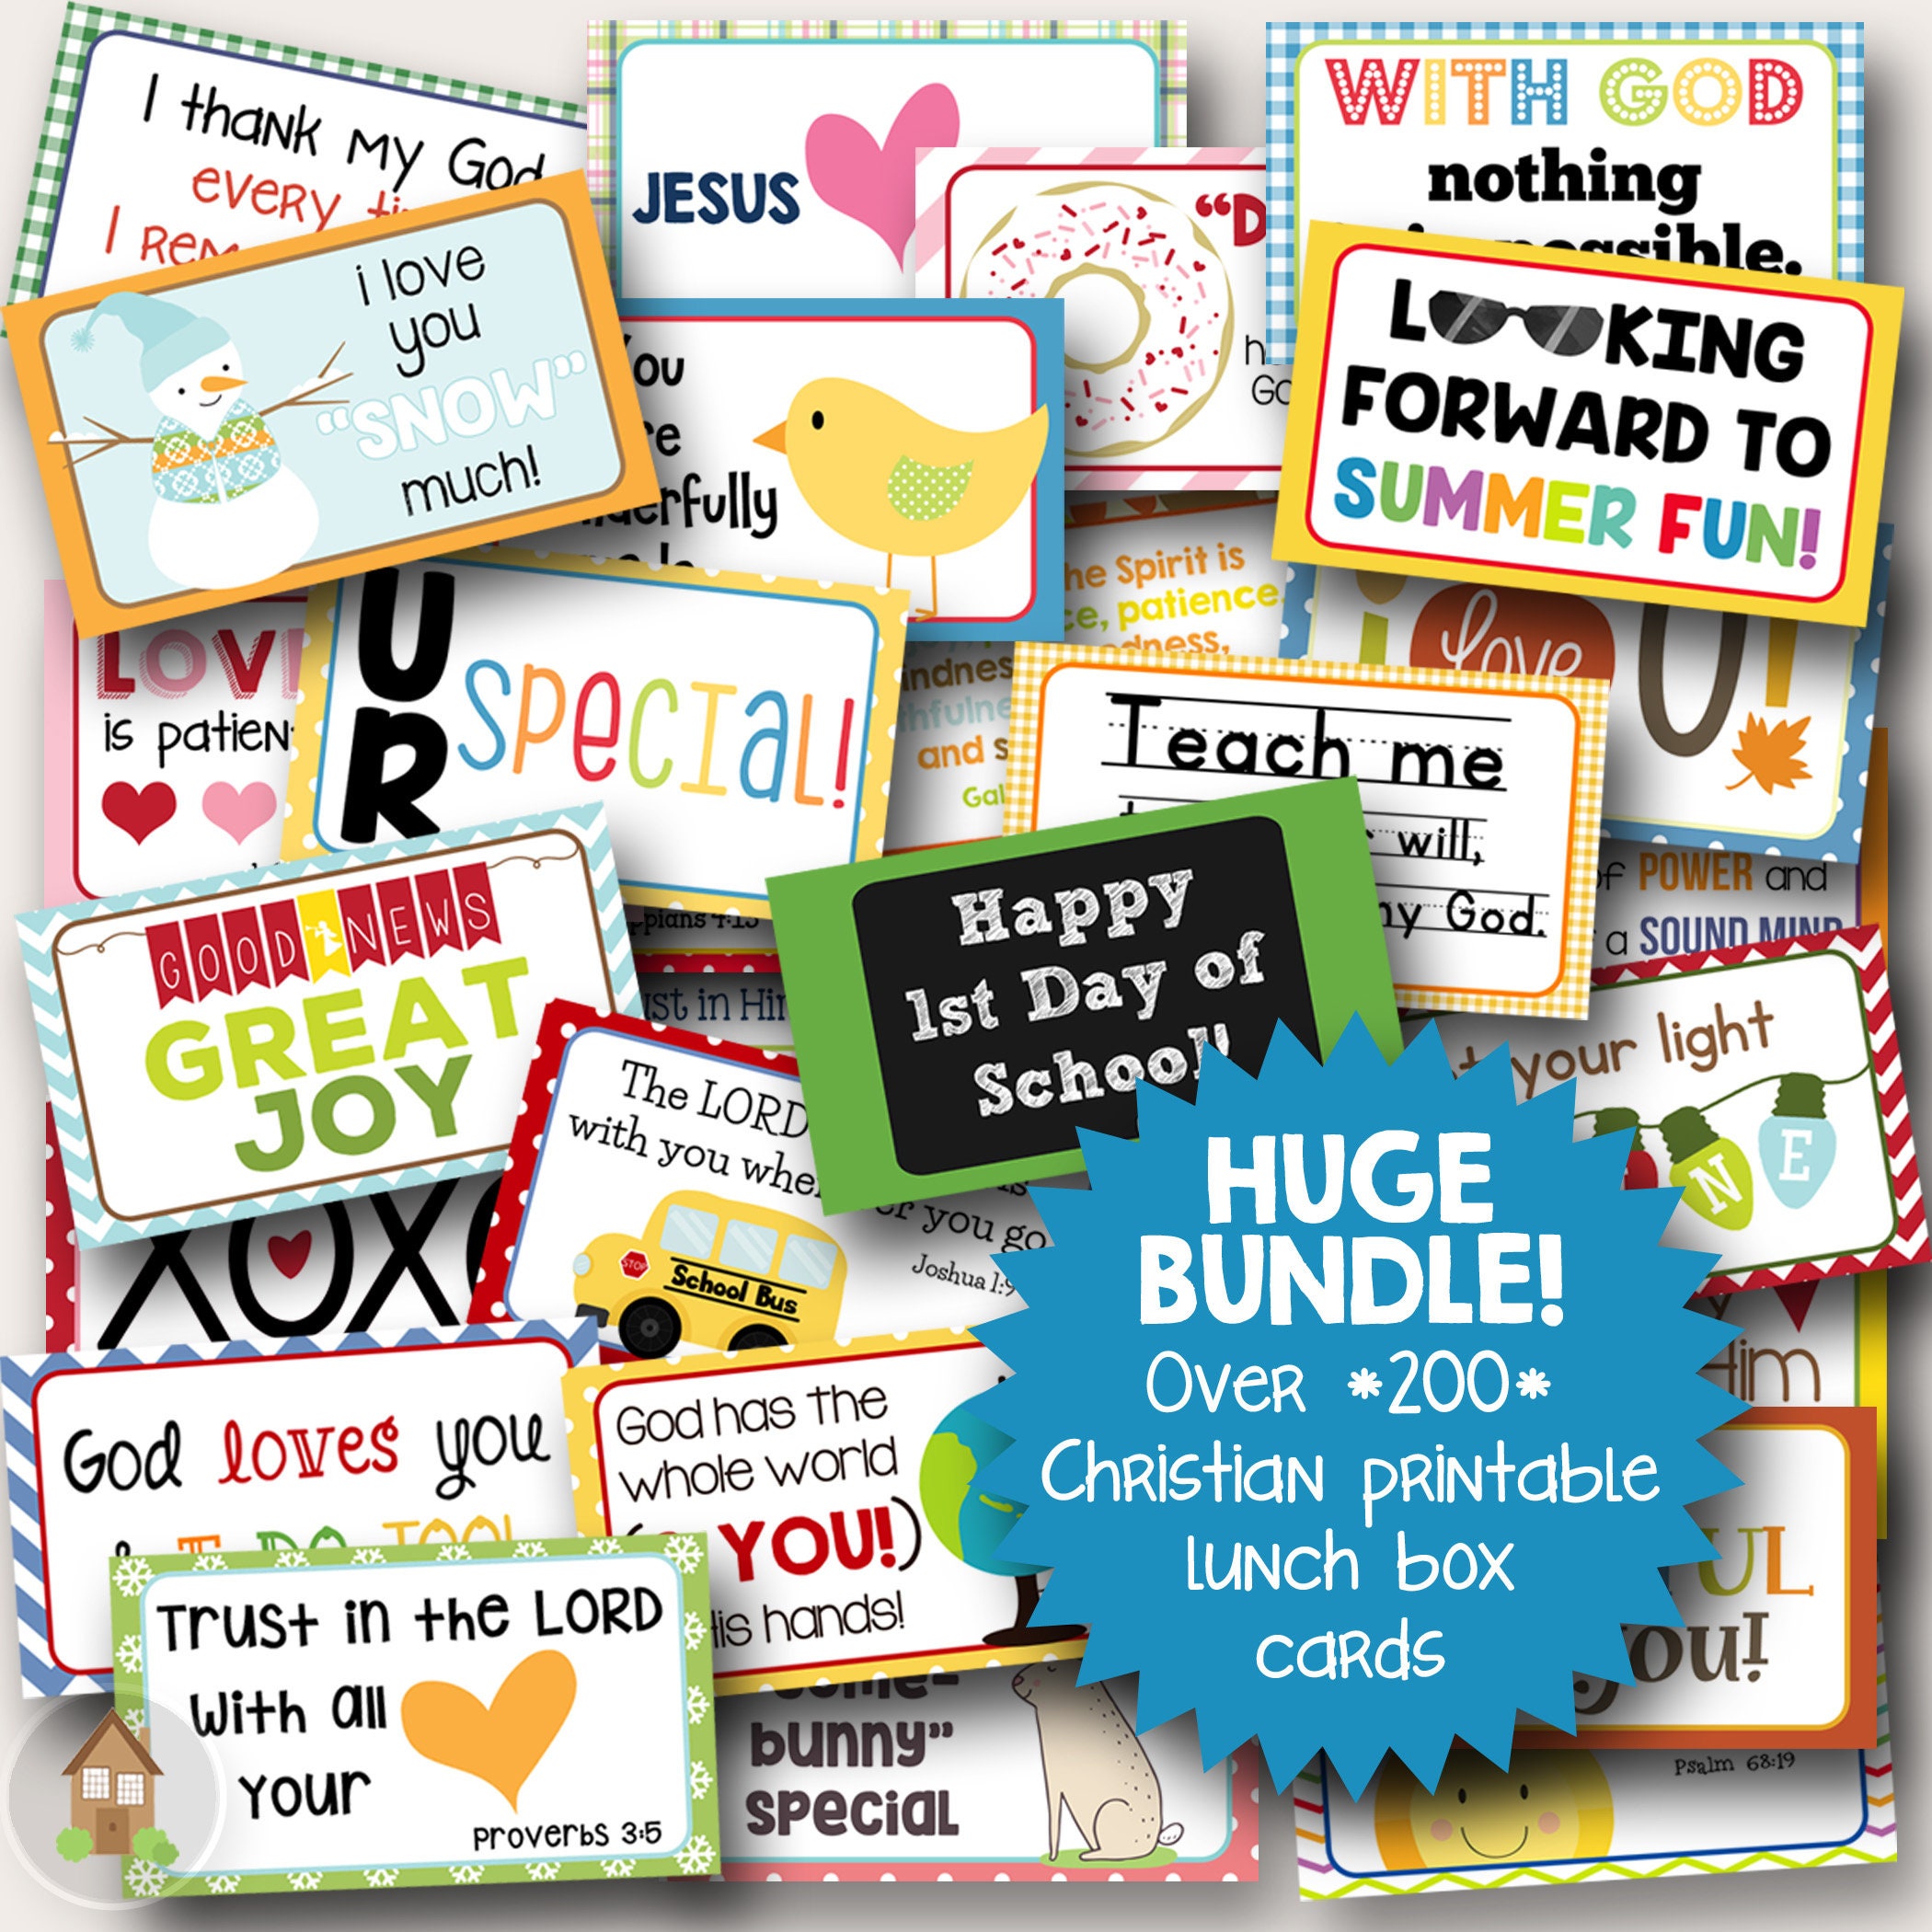 Lunch Box Notes for Kids – Pack of 60 Educational Lunch Box Notes - Lunch  Notes Learning Flash Cards Kindergarten or School - School Lunch  Accessories